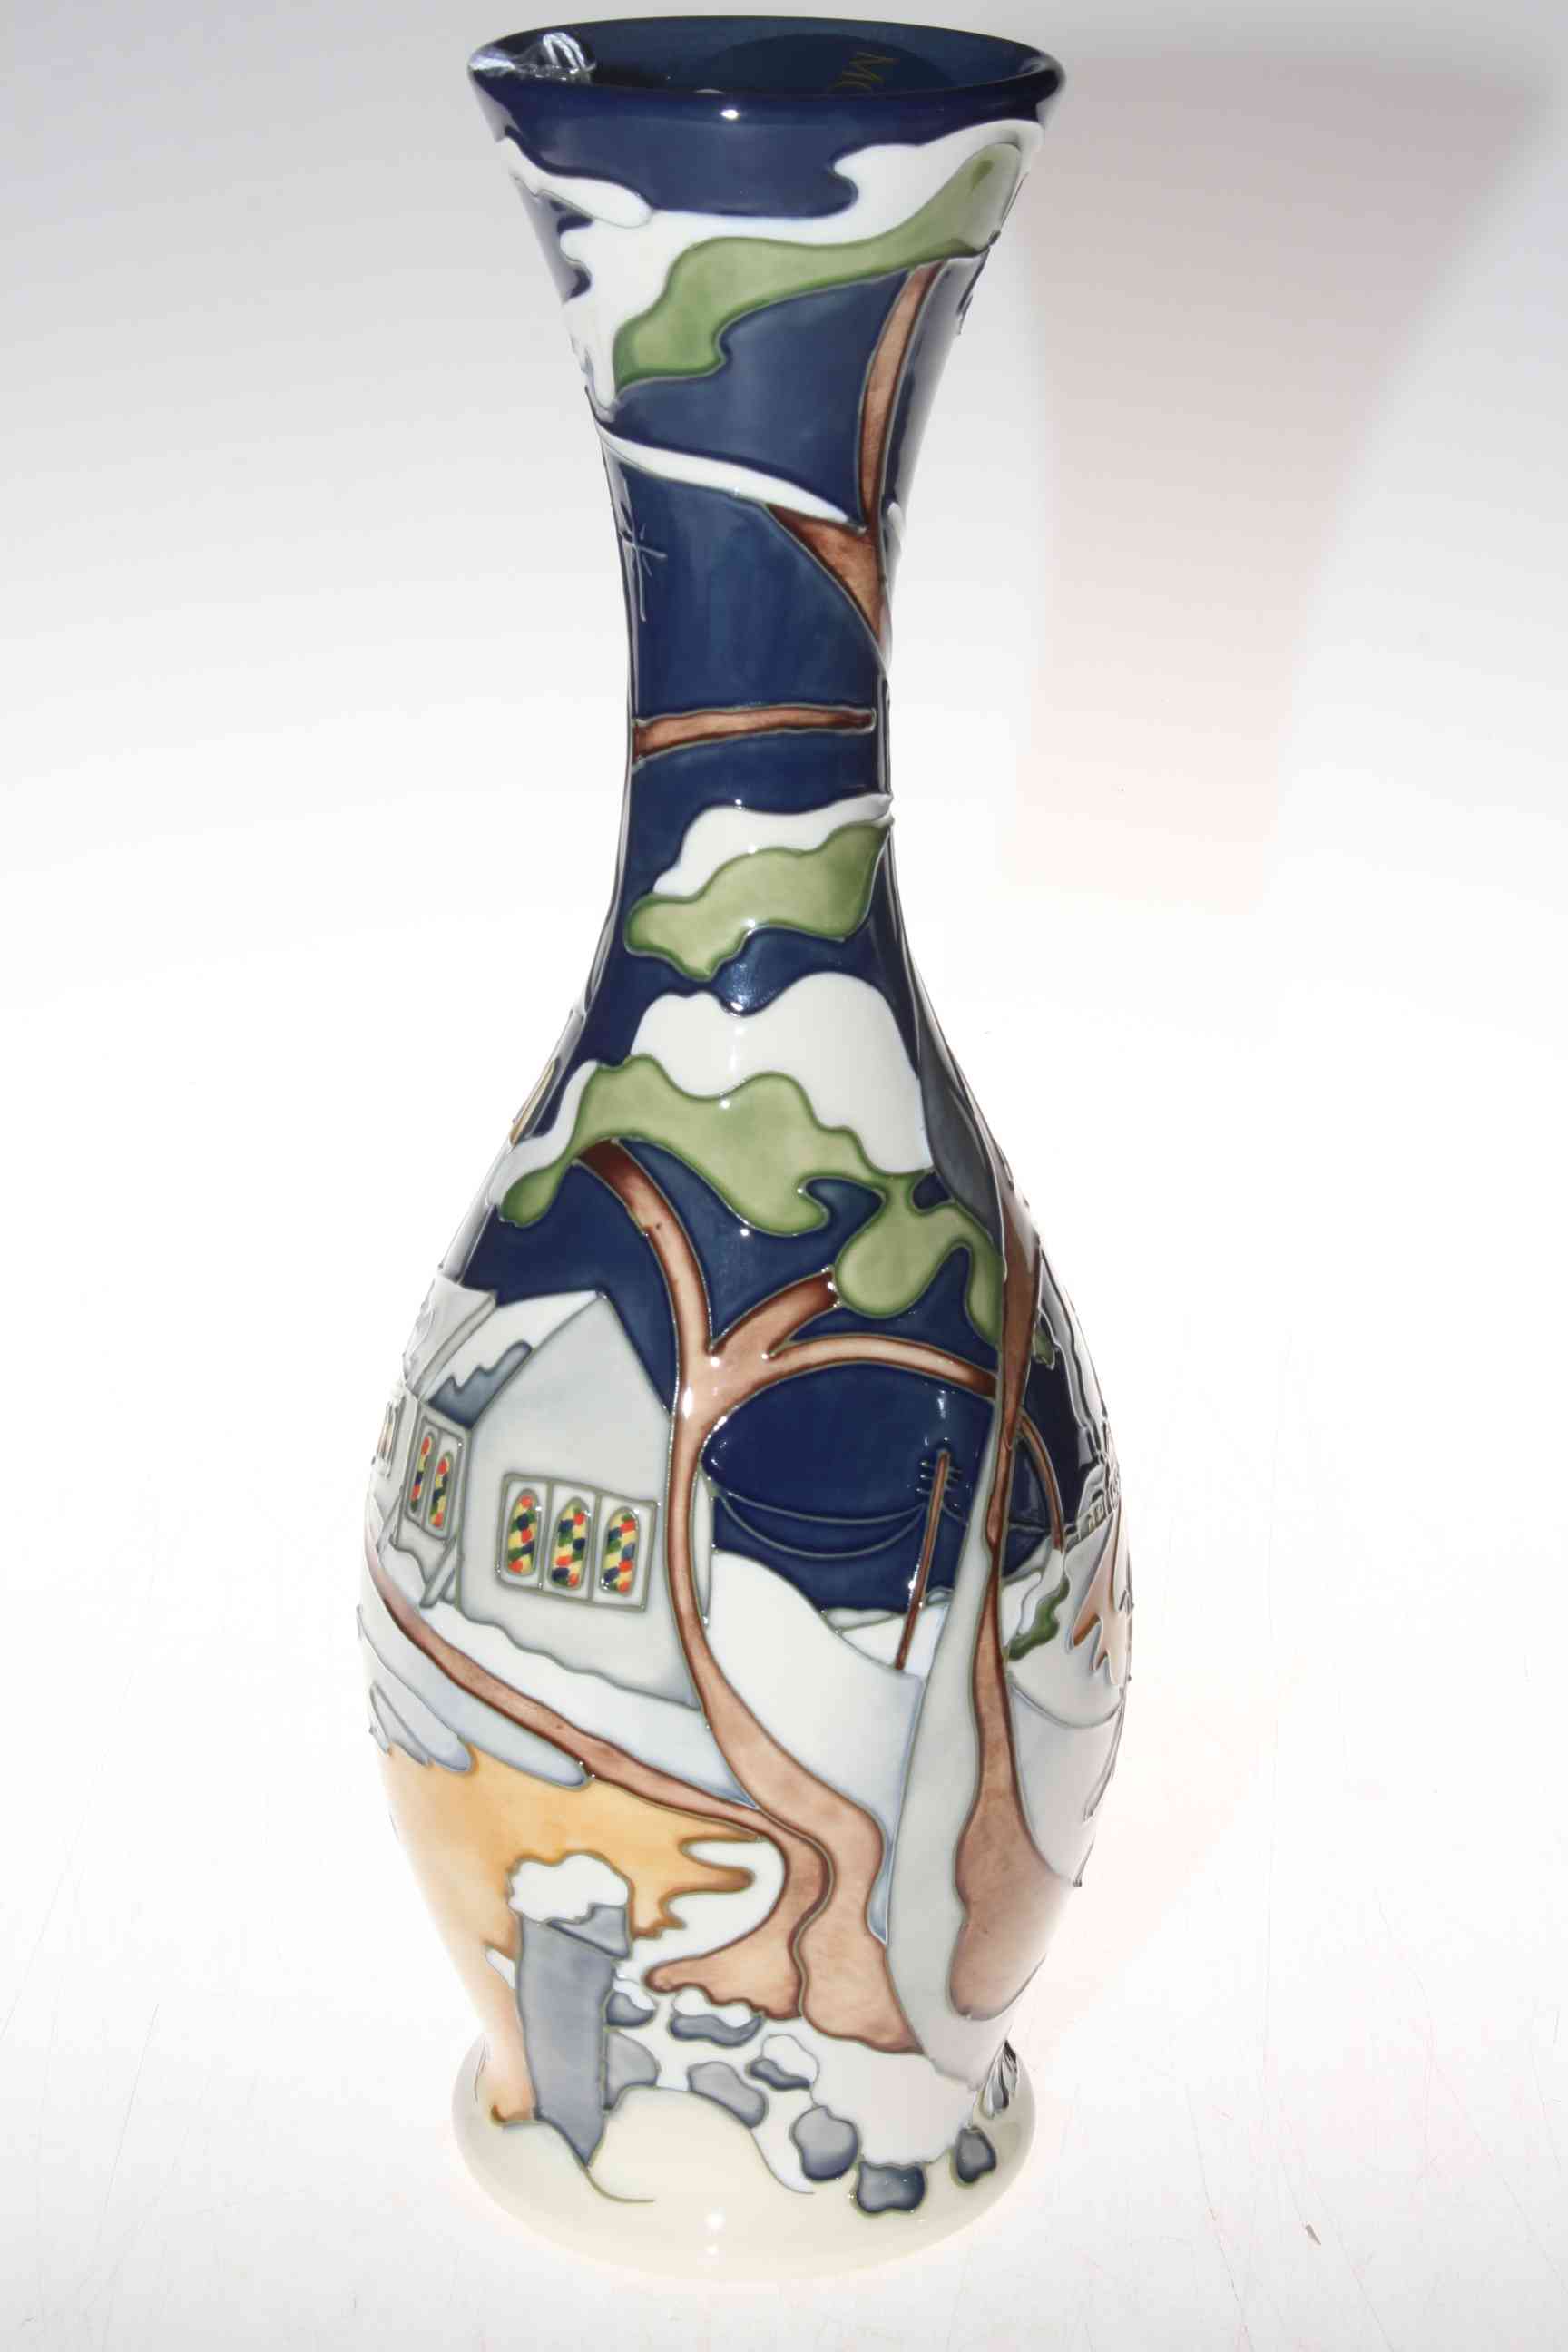 Moorcroft limited edition Church in Winter Landscape vase by Kerry Goodwin, 35/50, 37cm, with box. - Image 2 of 4